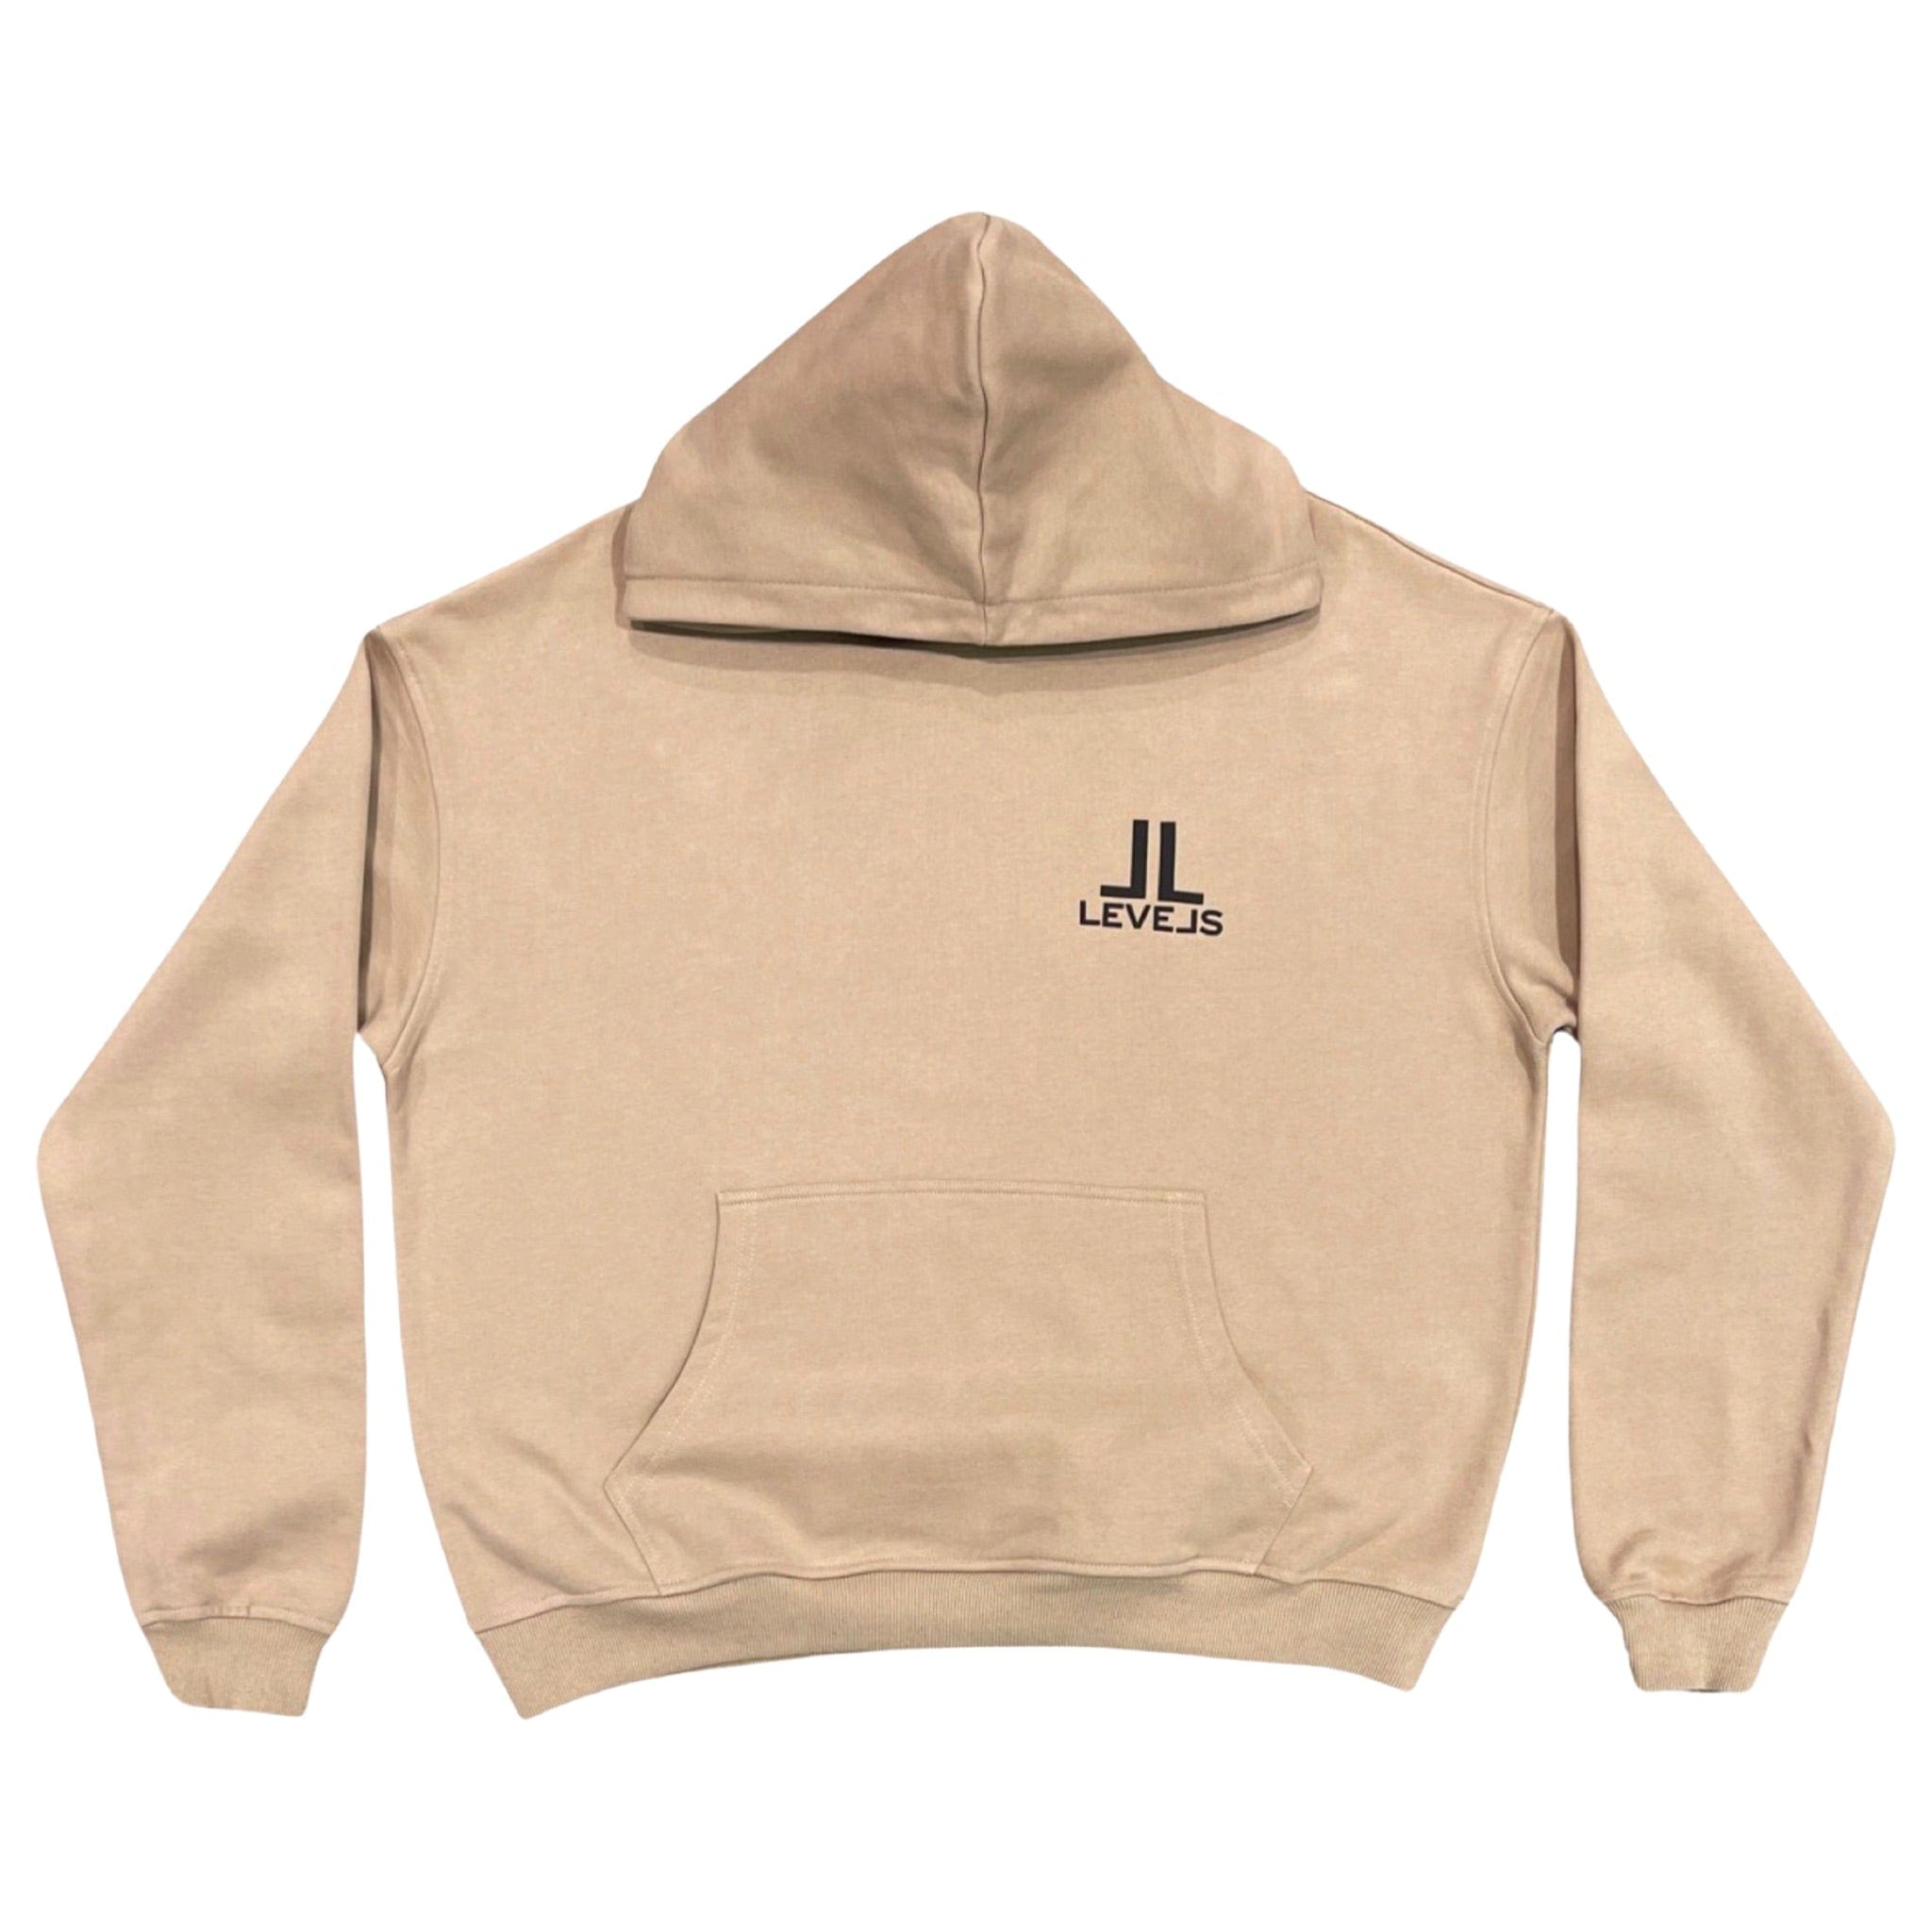 LEVELS, LLC Apparel & Accessories LUXE LEVELS OVERSIZED HOODIE (NUDE)